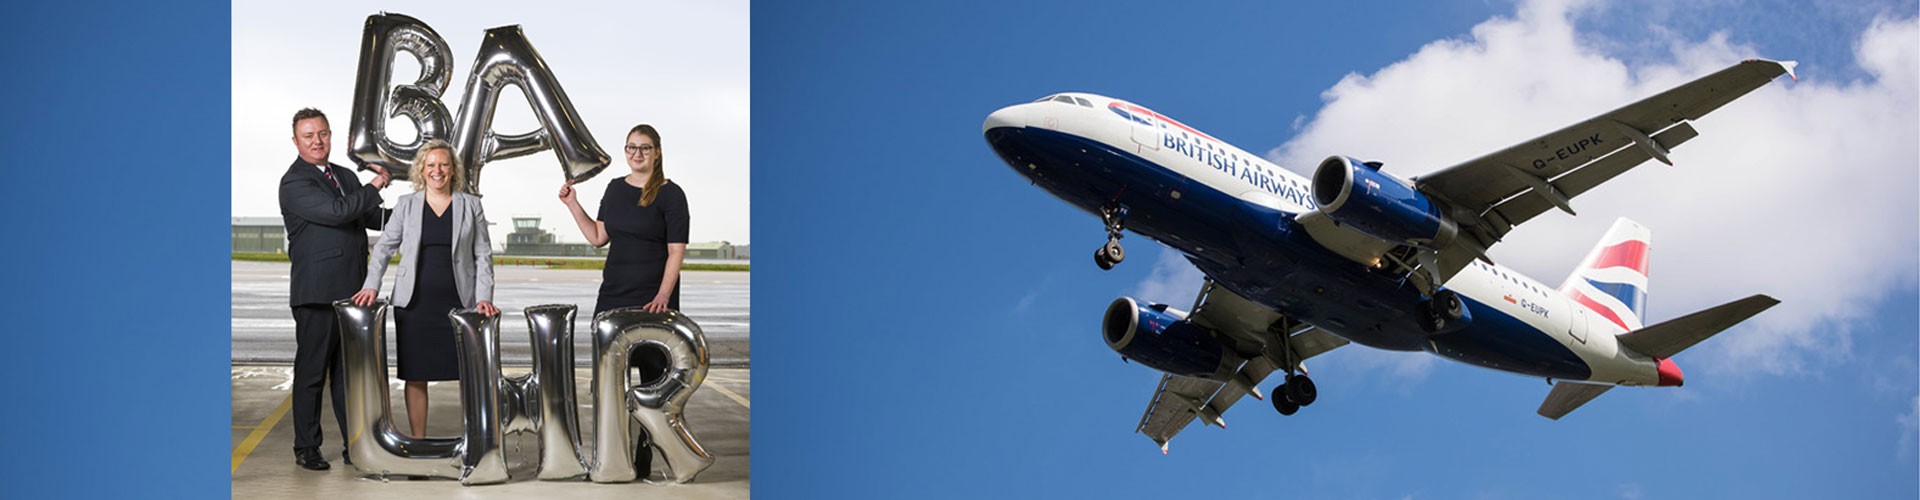 cornwall airport newquay team montage with BA Heathrow plane